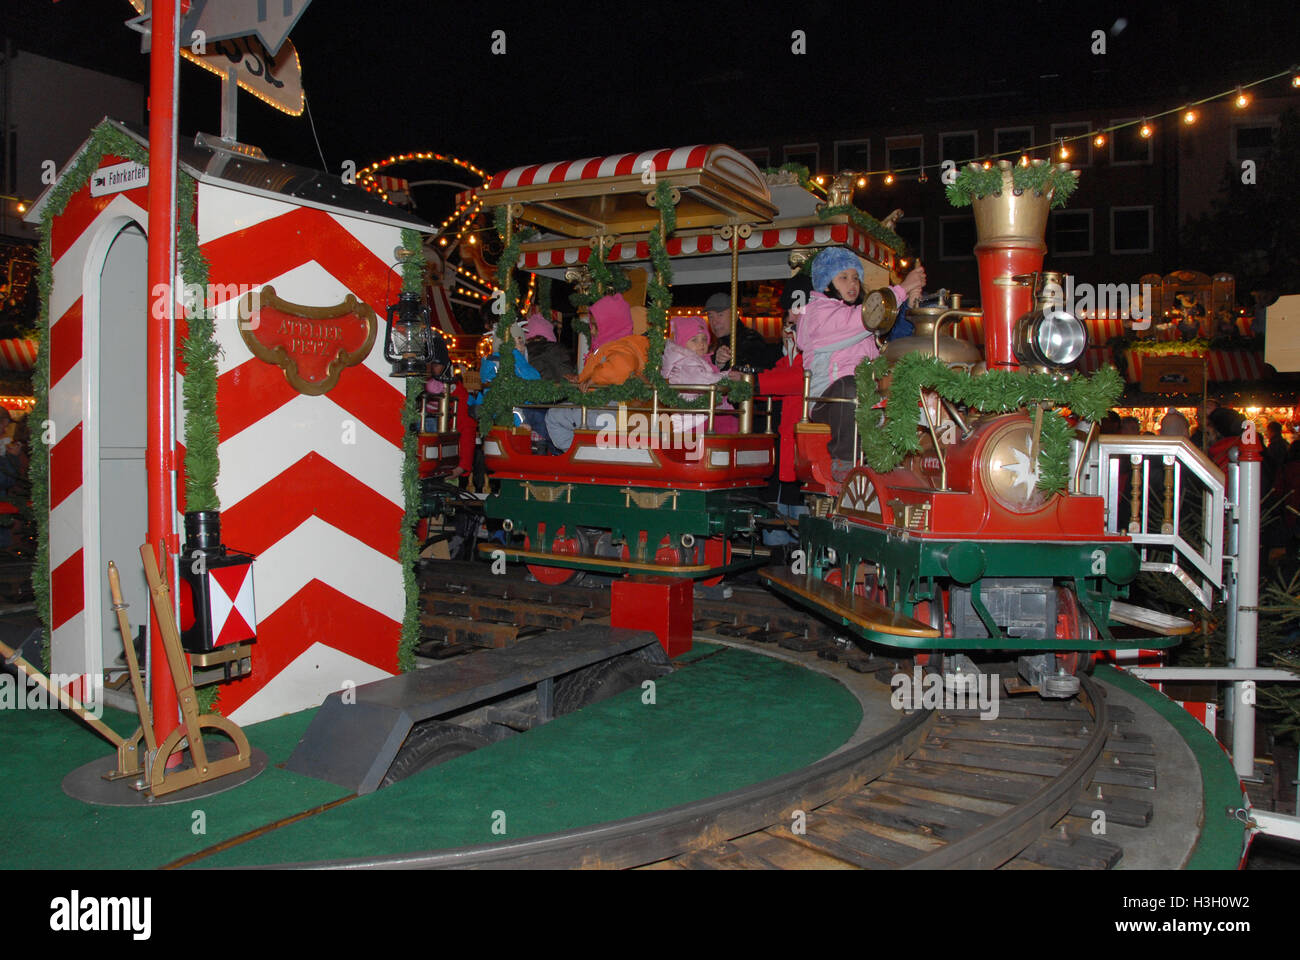 Children enjoying a  train ride at the Children's Christmas market as part of the Nuremberg's Christmas Market in Nuremberg, Ger Stock Photo